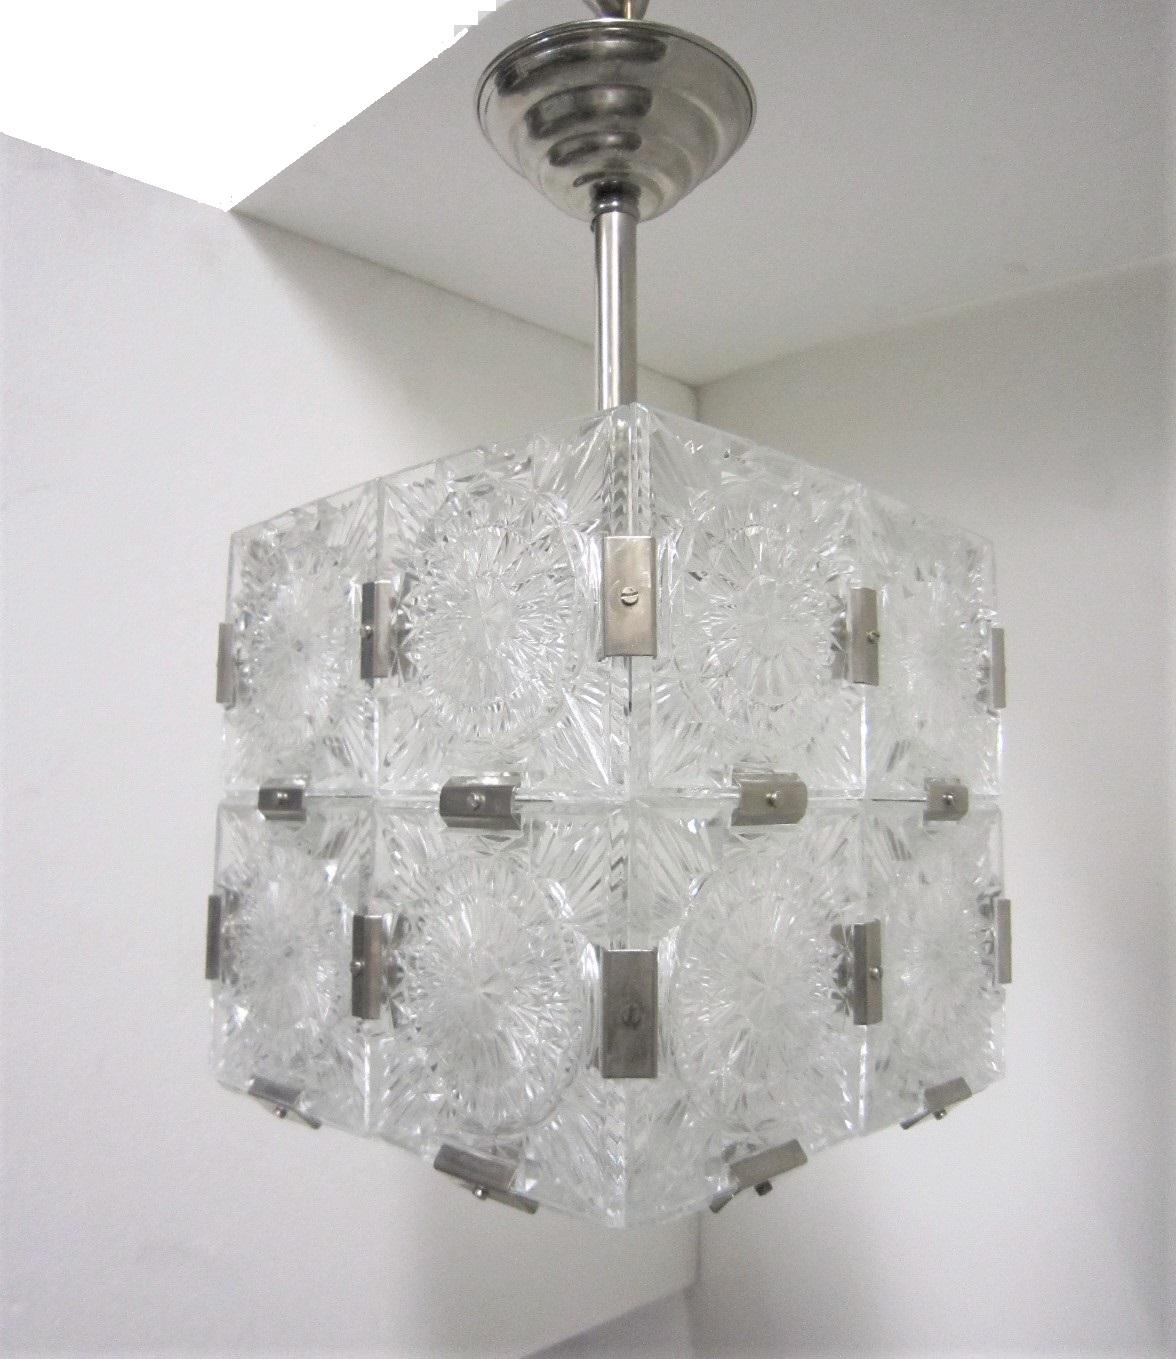 Multiple pendant squares available. Priced here as a set of three.
Modernist square chandeliers comprising 20 squares of cut-glass in two tiers formed together with original nickeled bronze brackets. The juxtaposition of the circular patterns in